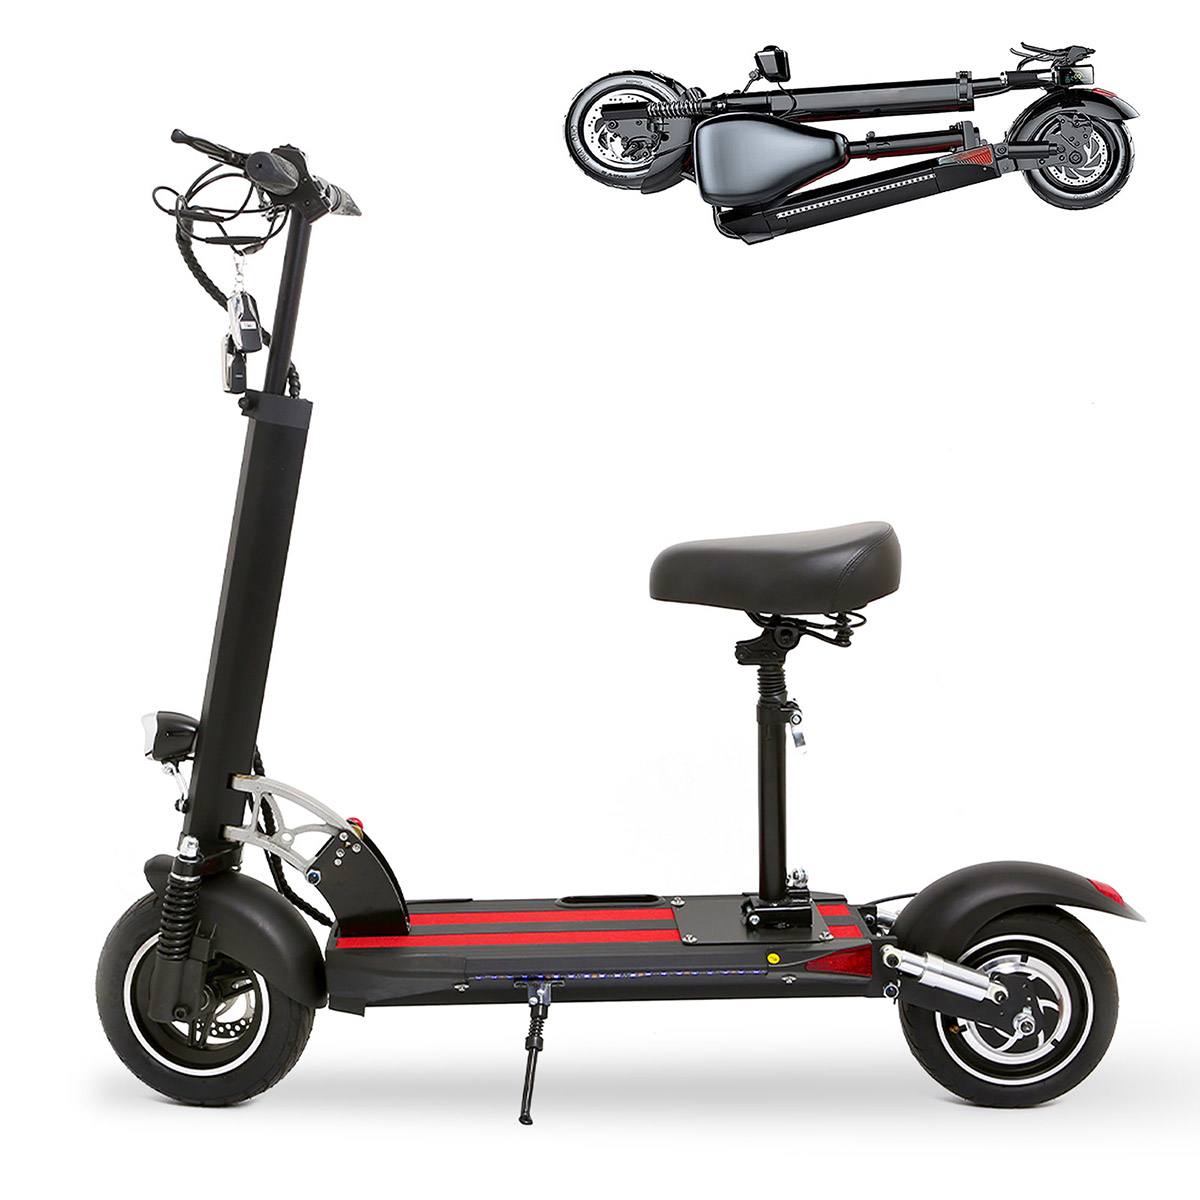 Find EU Direct TOODI ES N3 48V 12 5Ah 500W 10in Folding Electric Scooter 120kg Load Range E Scooter w/ Seat for Sale on Gipsybee.com with cryptocurrencies